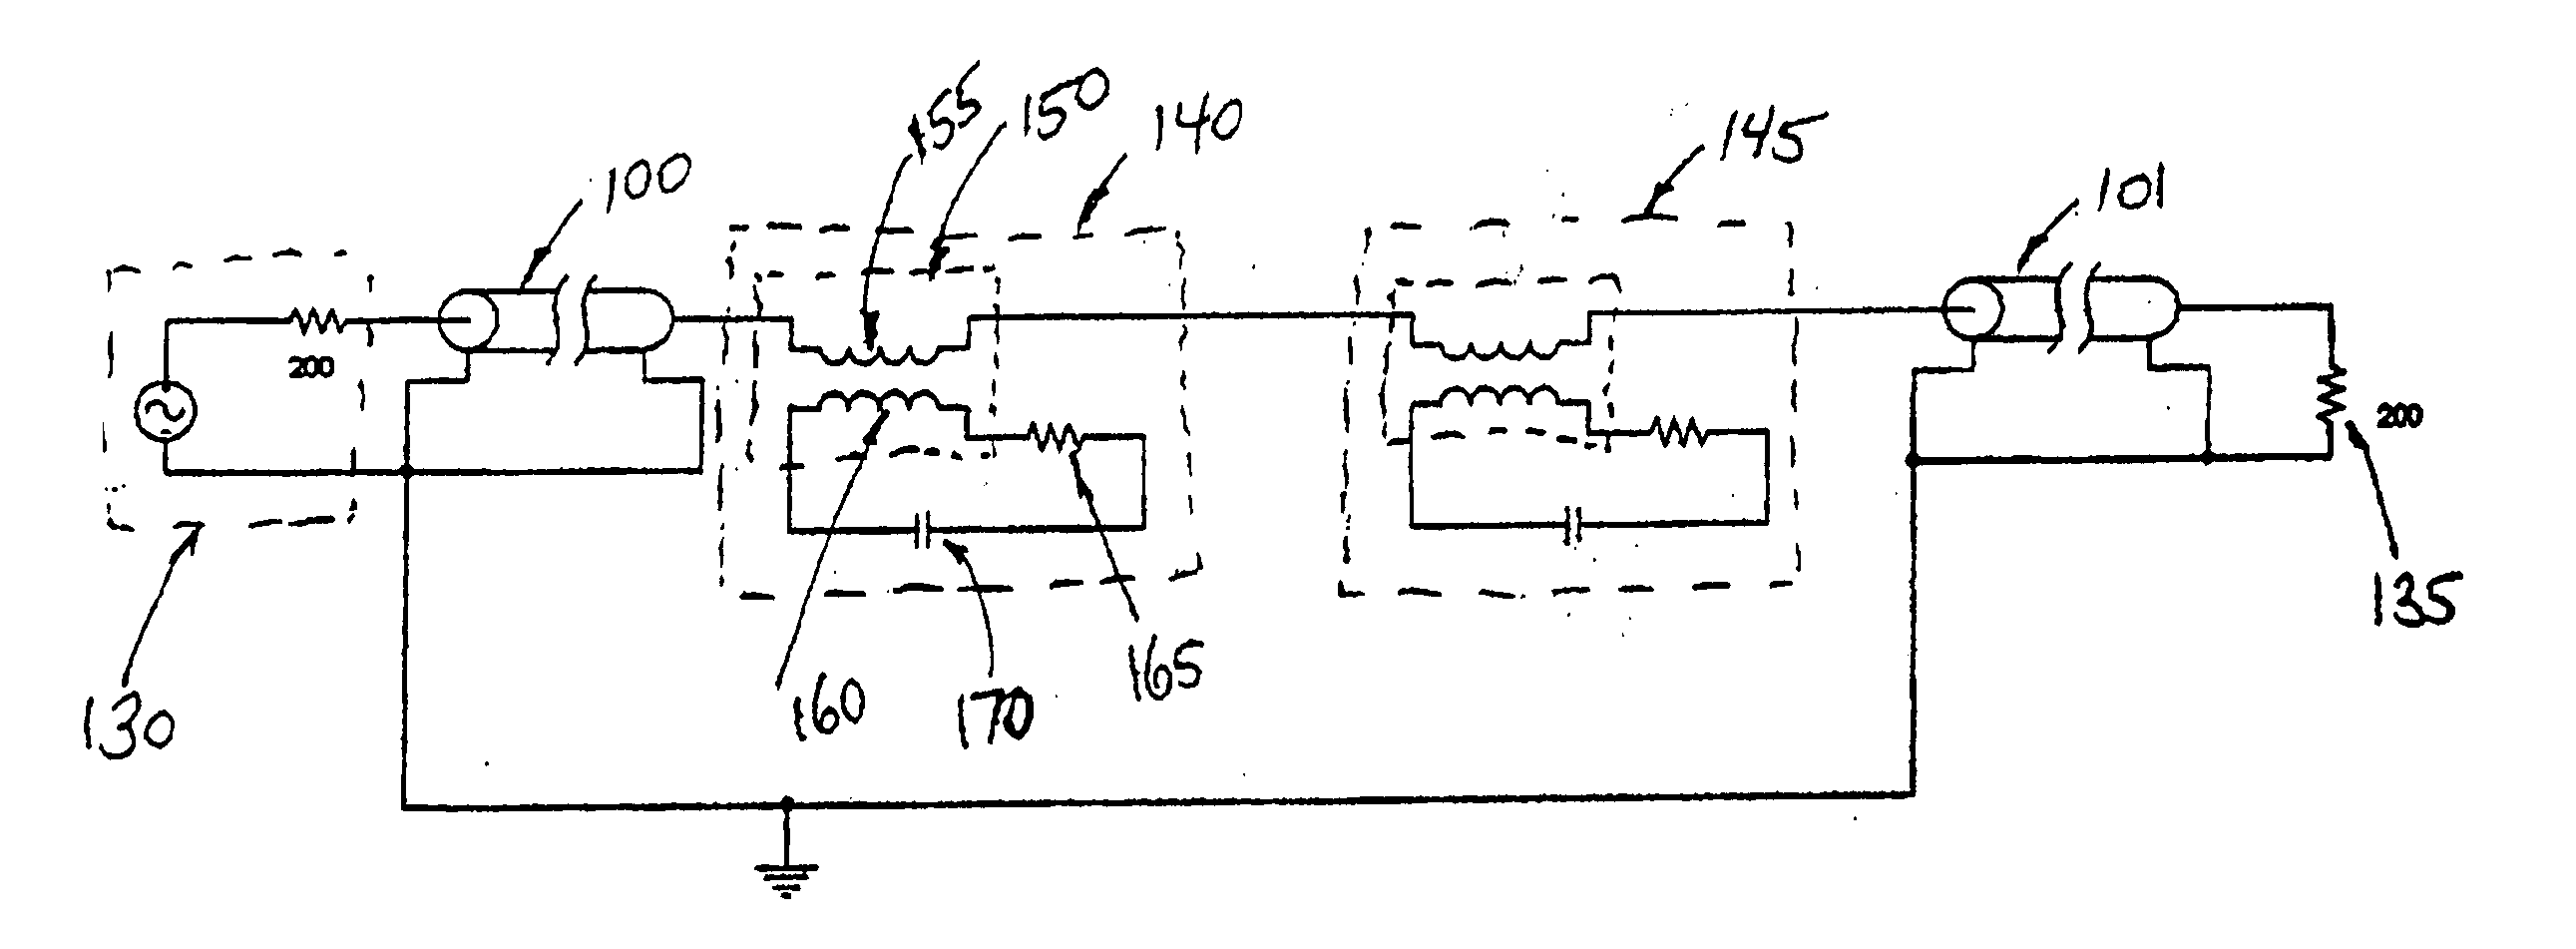 Filter for segmenting power lines for communications